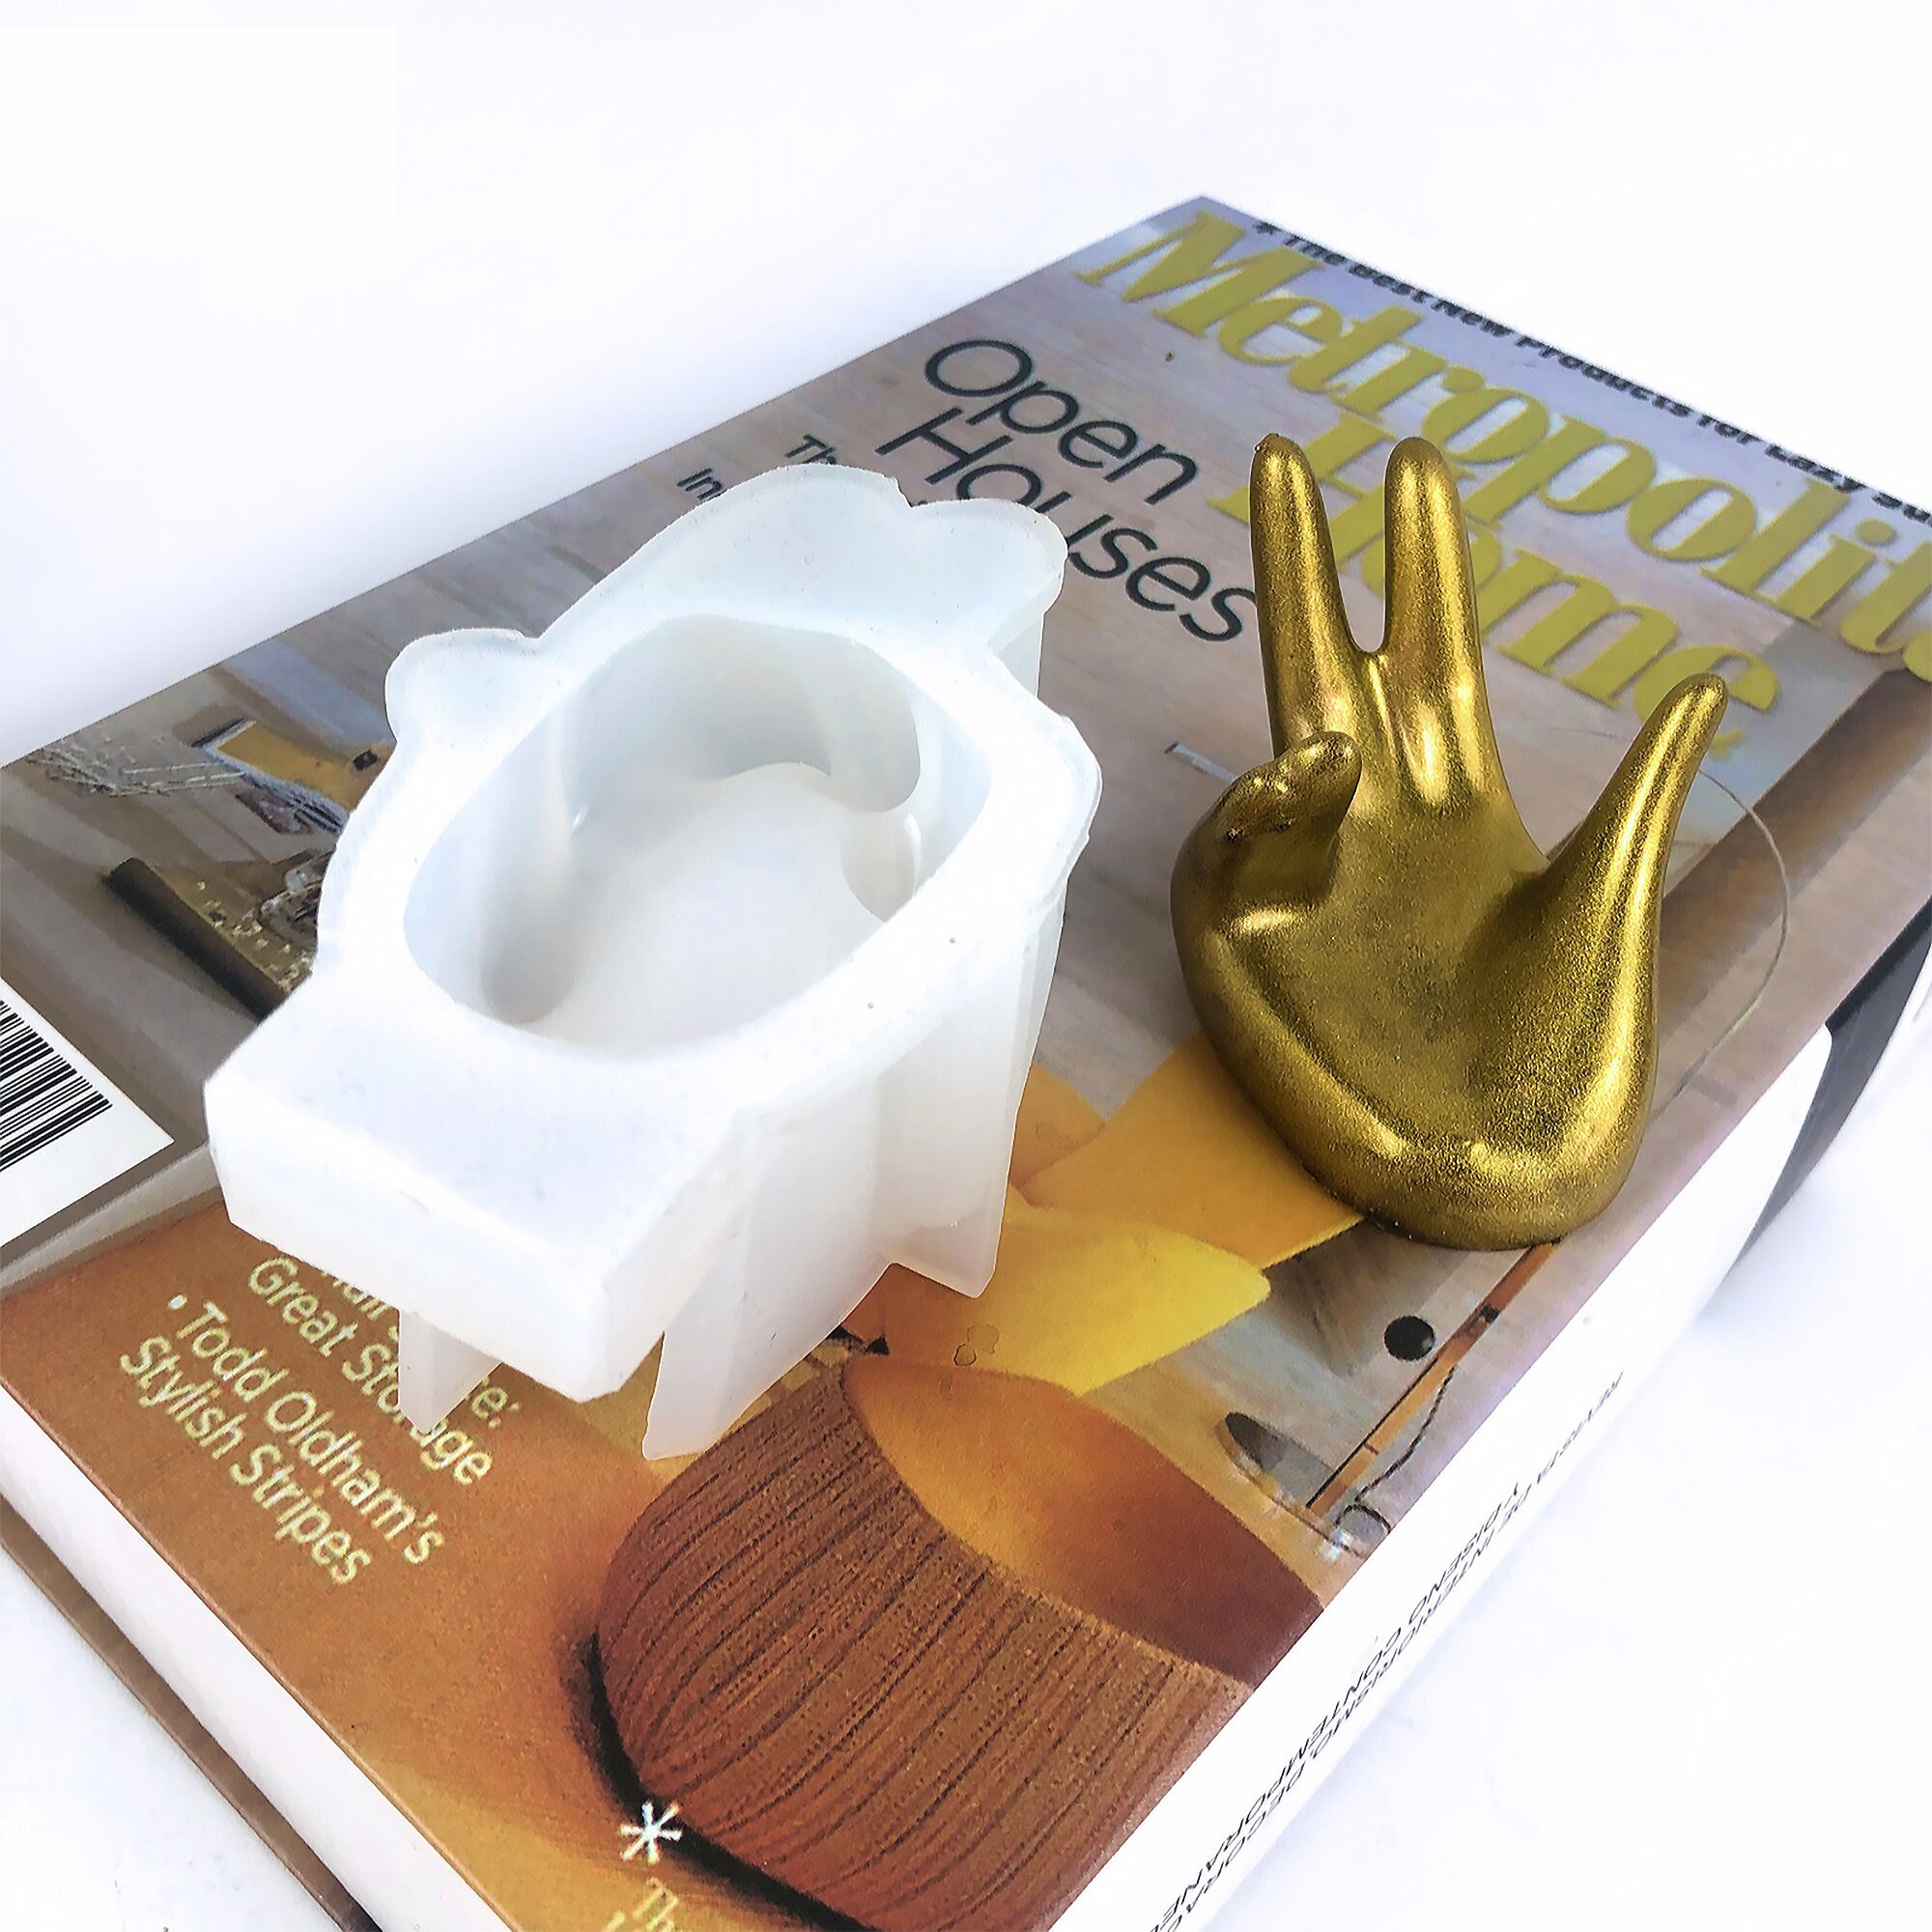 Swivel Wax Melt Silicone Mold for Wax. Finger Wax Melt Silicone Mould. Wax  Melt Mold. Middle Finger Silicone Mold